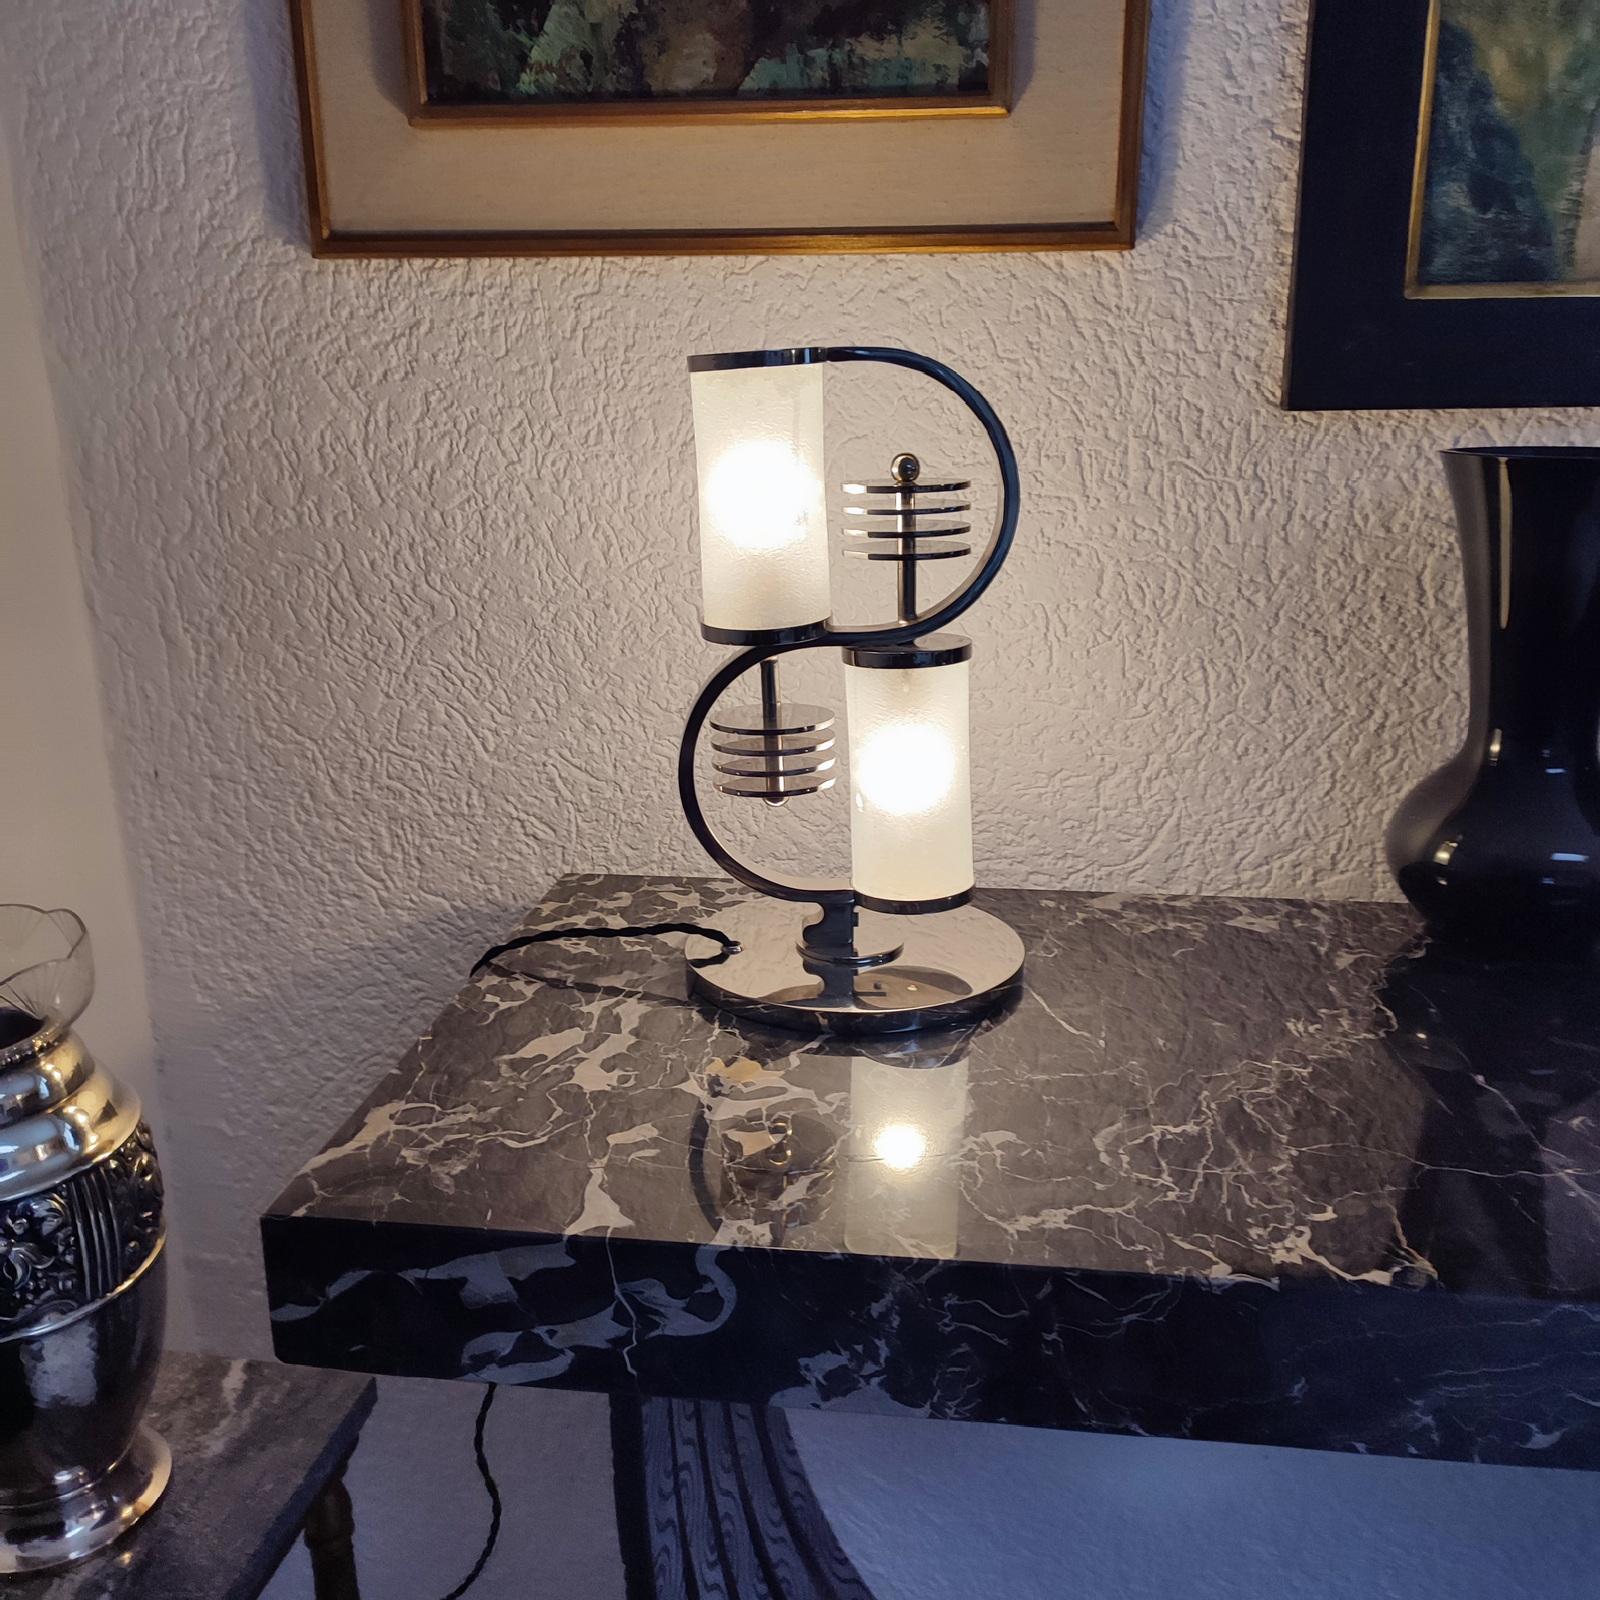 A very rare and important modernist table lamp in chrome-nickel and glass. Designed by Edgar Brandt, with etched glass by Daum Freres.
An identical model is illustrated in Joan Kahr's 